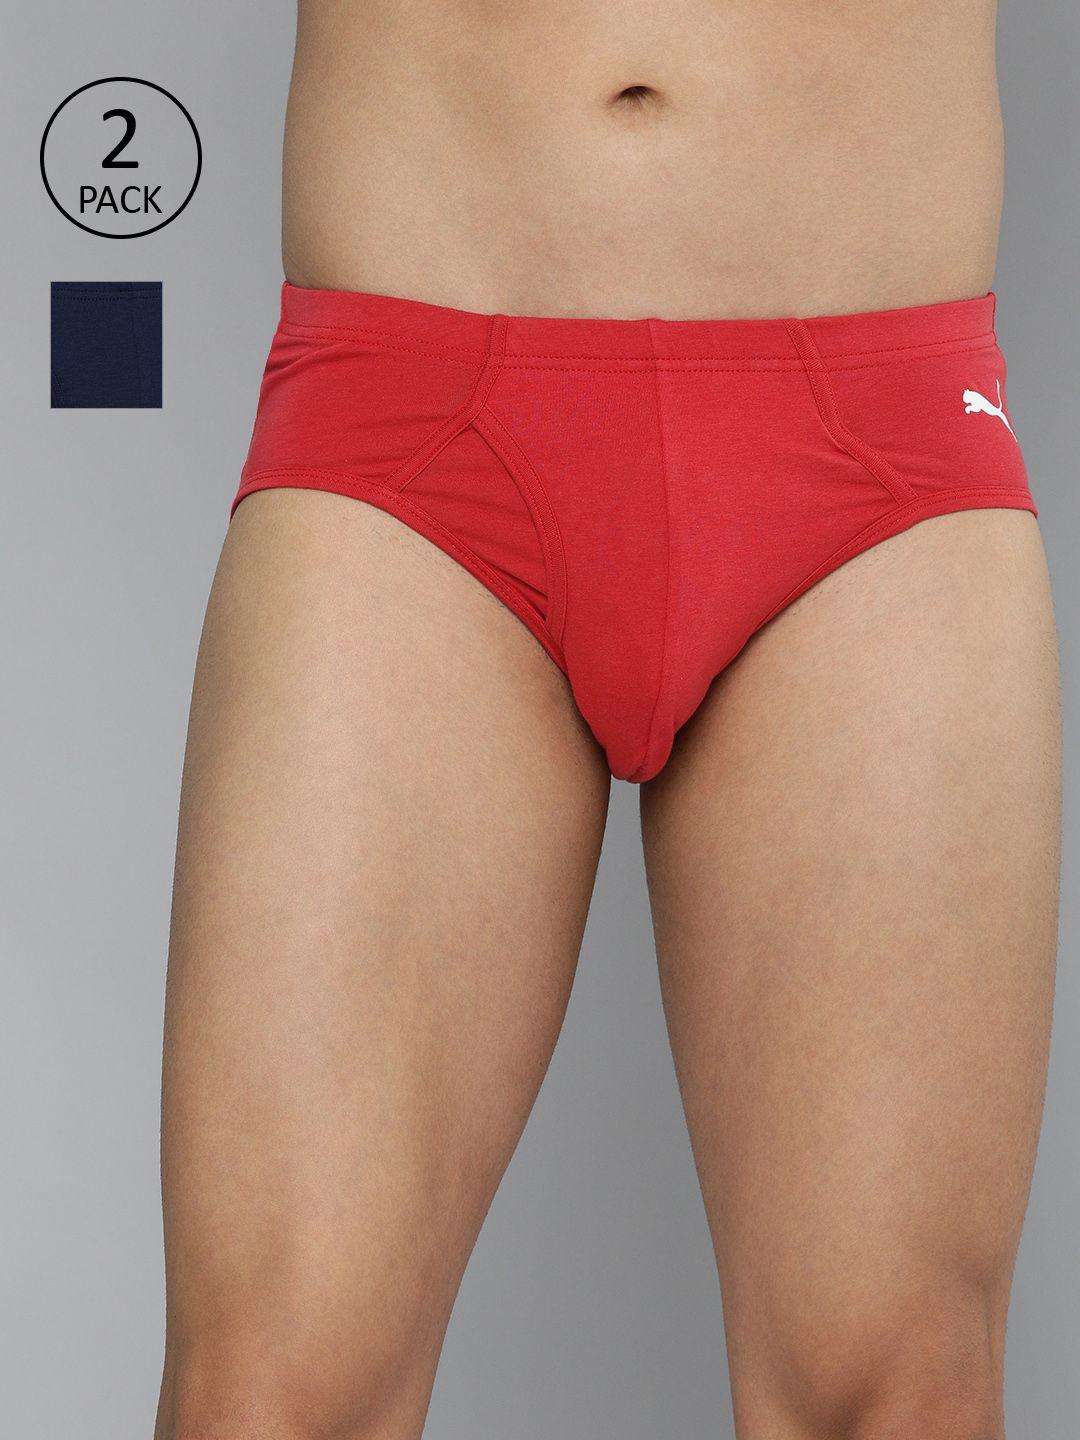 puma-men-pack-of-2-red-&-navy-blue-solid-stretch-briefs-93210202